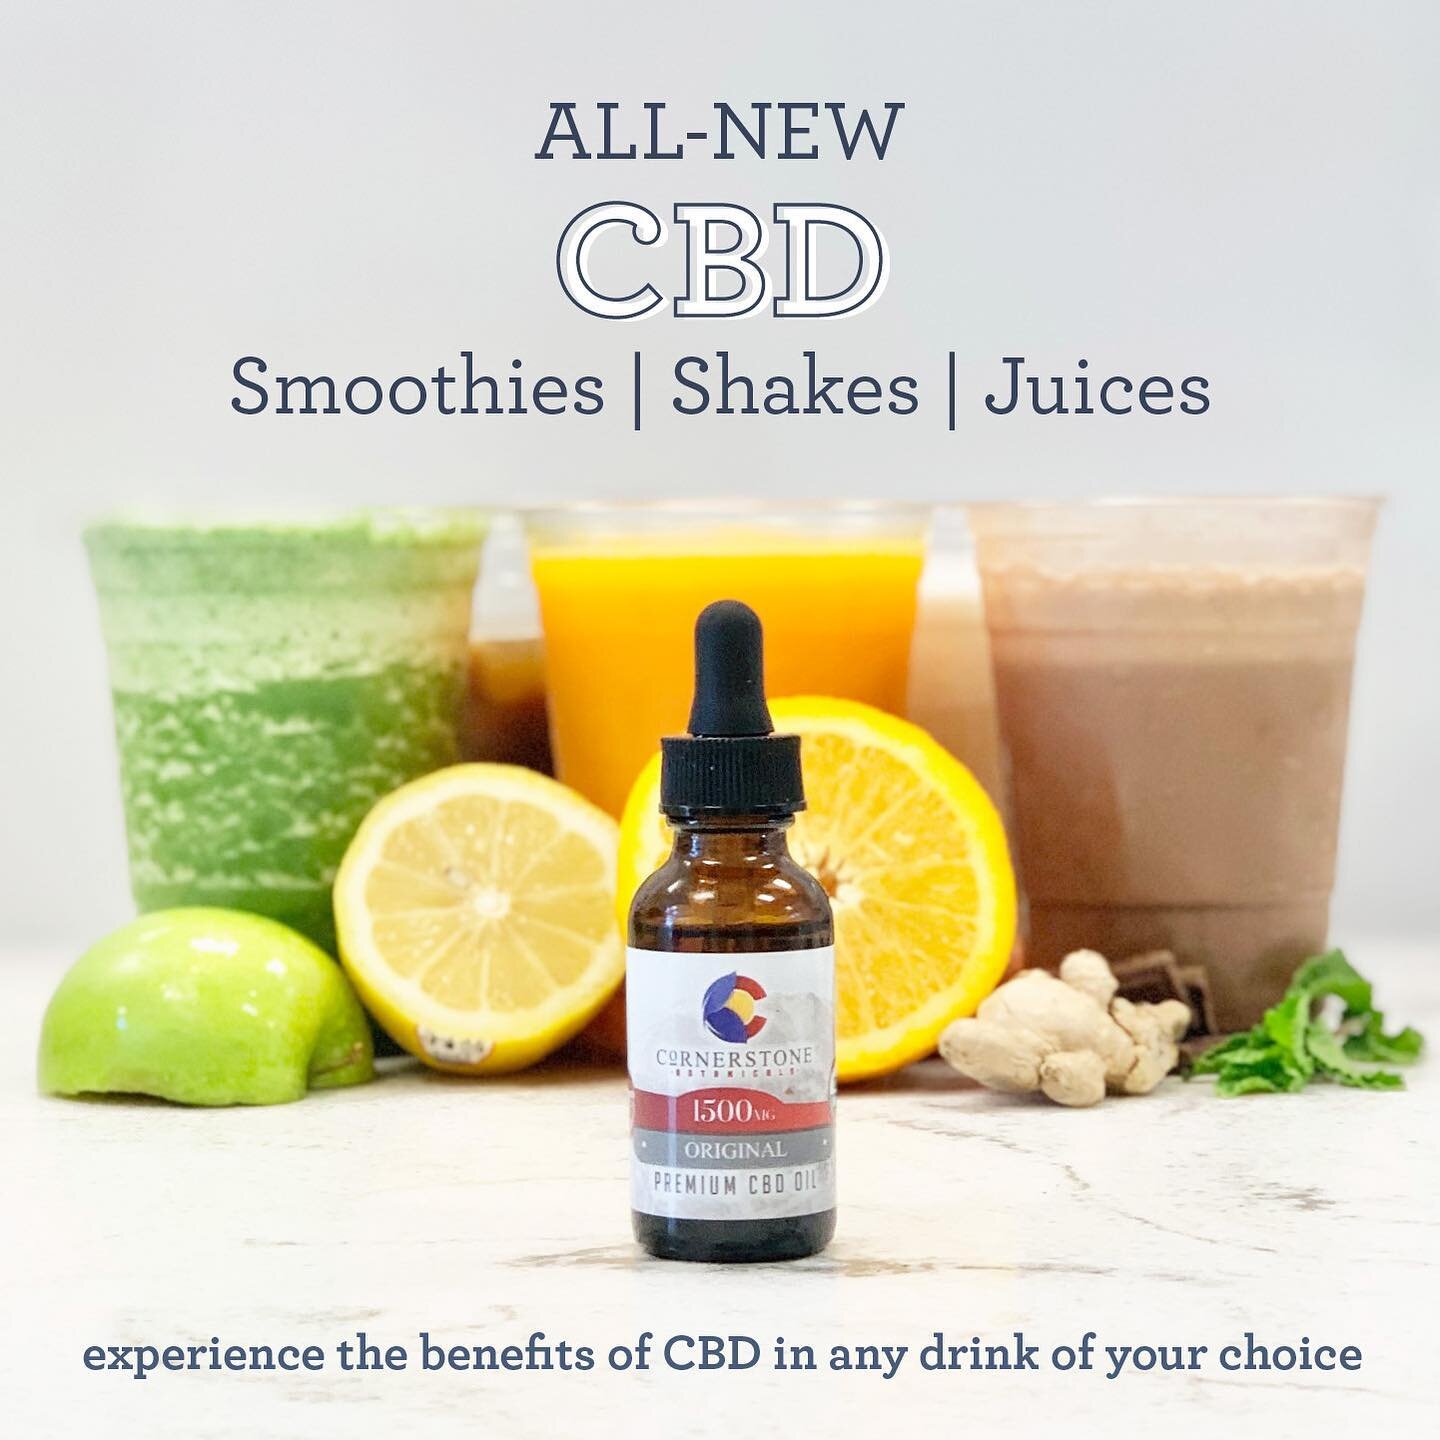 🌿 SUPER EXCITING NEWS ⭐️ We have added CBD as a new ingredient to our smoothies and shakes! 

Now you can add CBD to any drink and experience the benefits!

We&rsquo;ve partnered with an incredible local, family-owned company, Cornerstone Botanicals